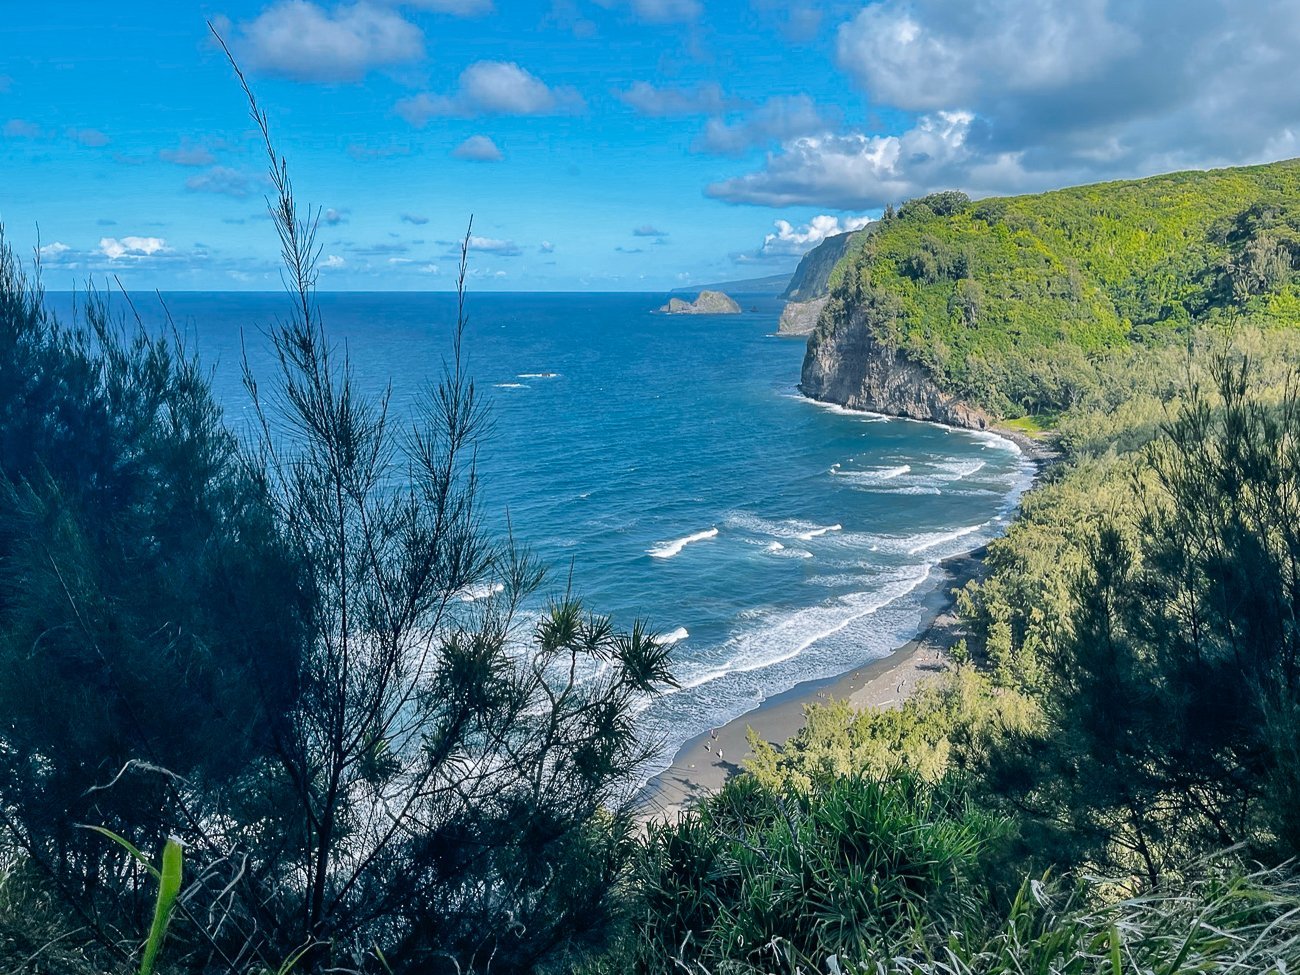 View of Pololu Valley and ocean from trail